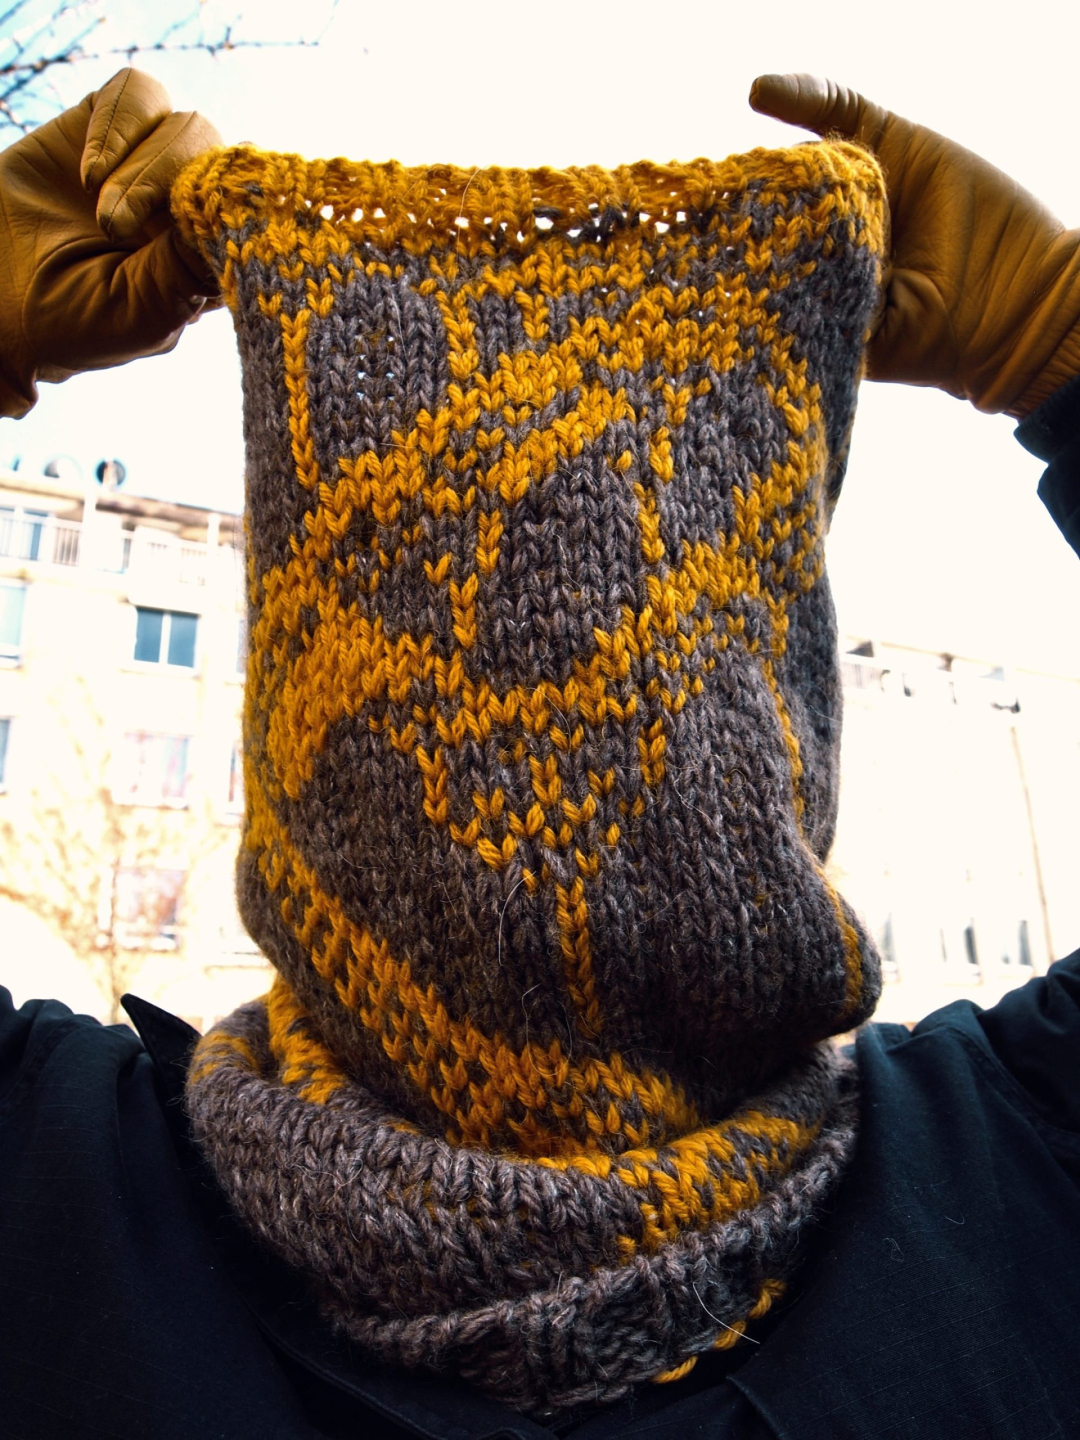 Cellular Automata cowl: a snuggly 2-strand colorwork cowl worked in the round with no seams